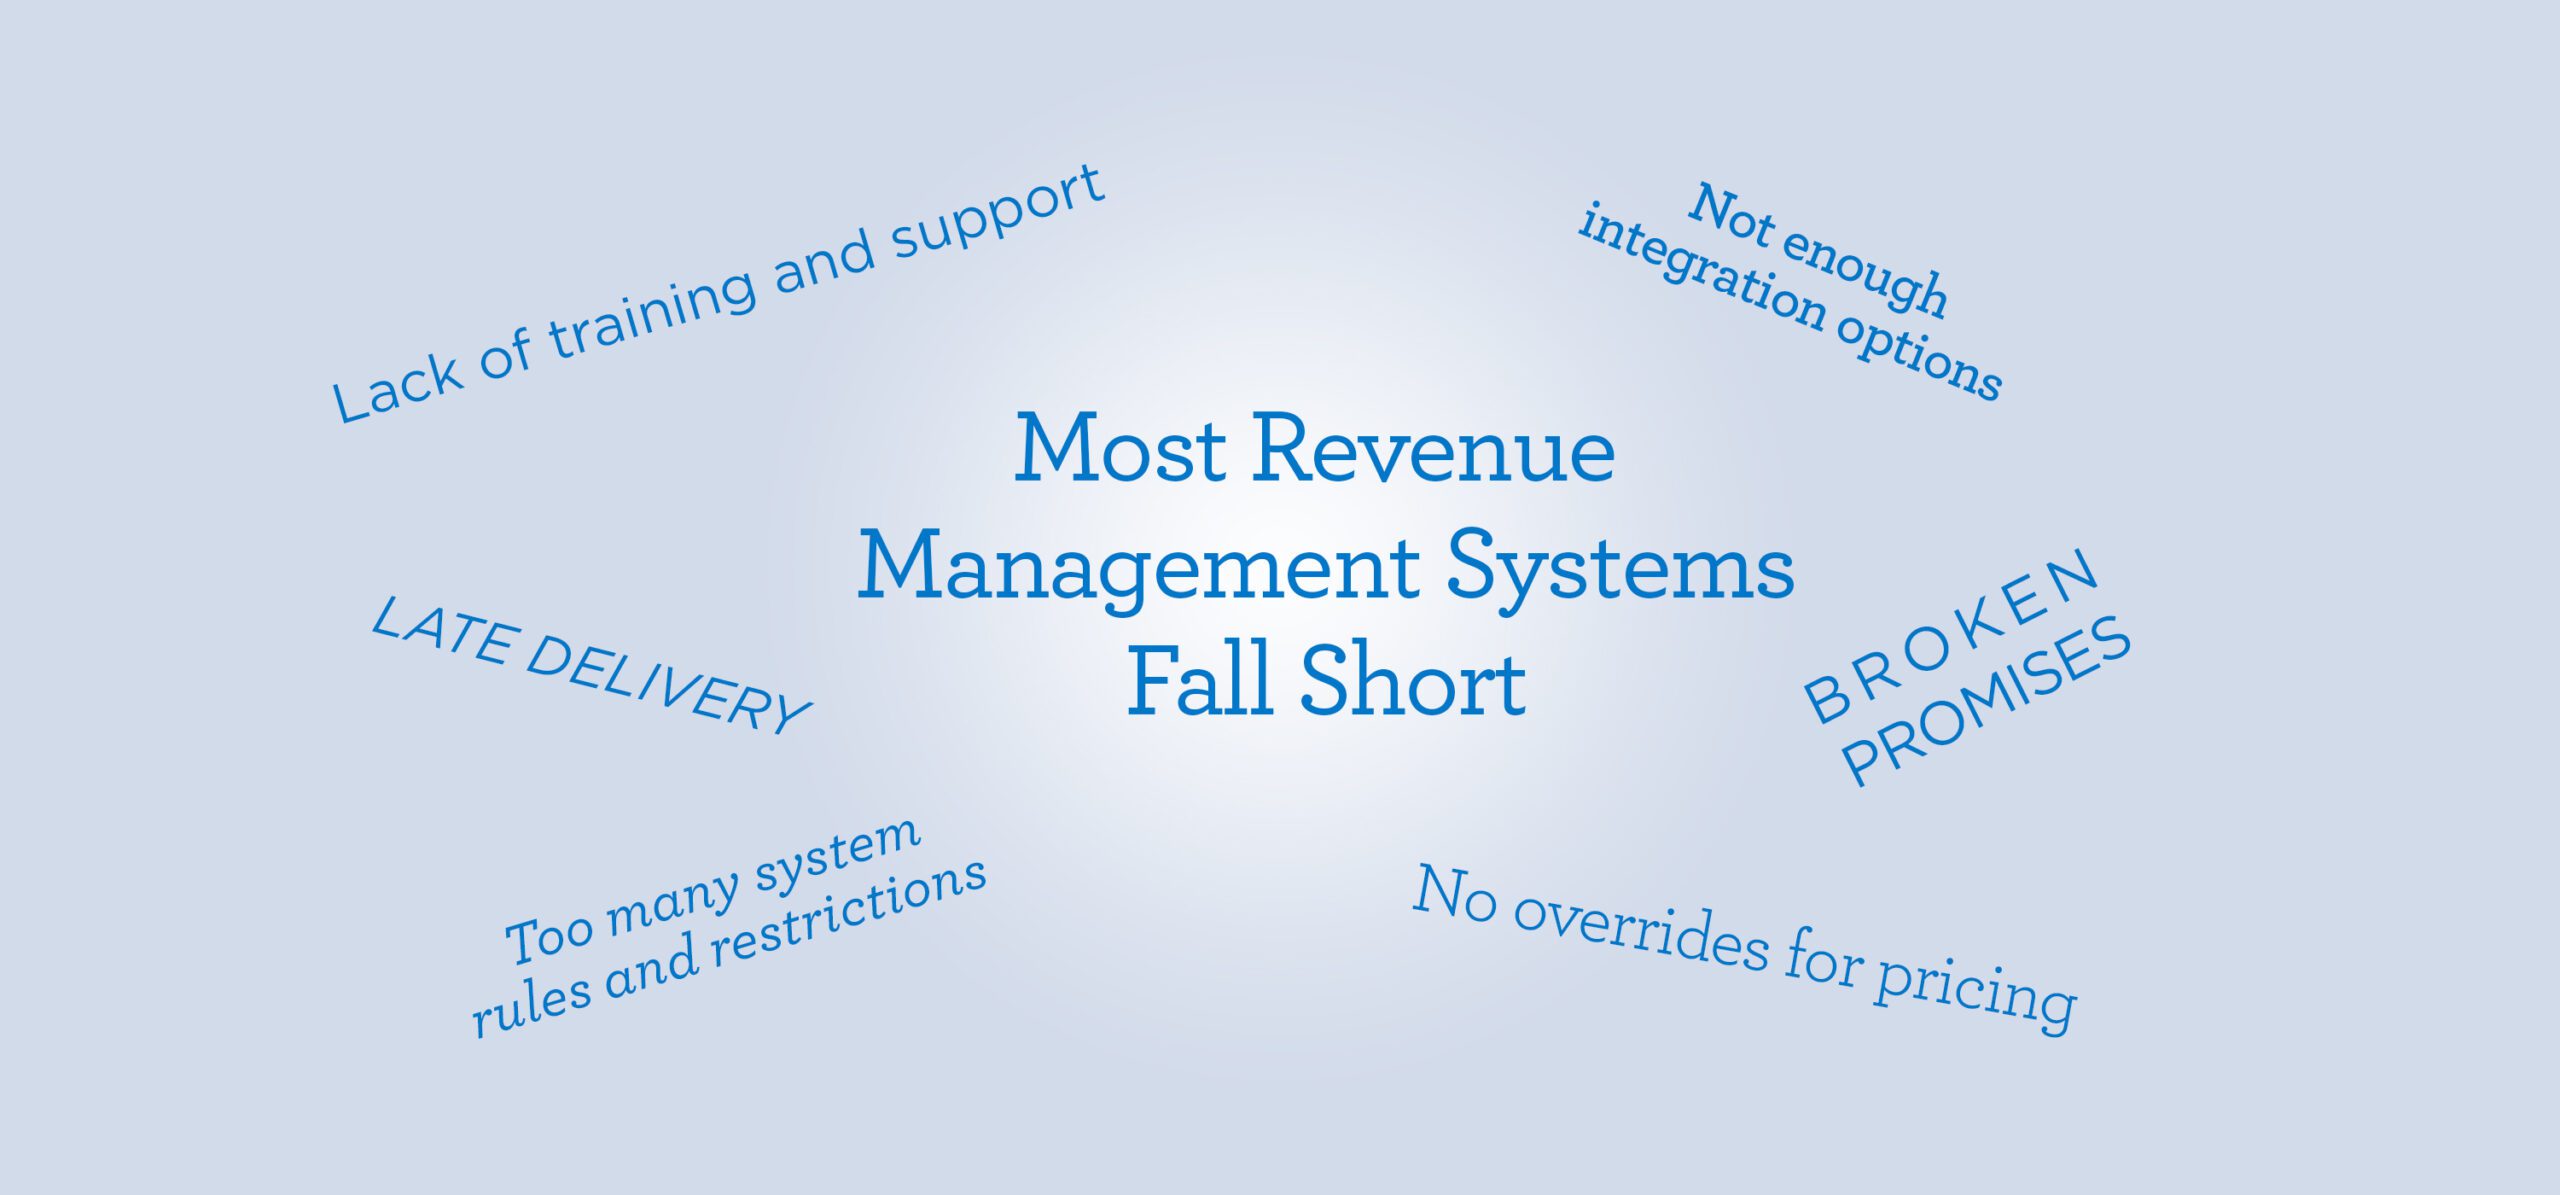 Most Revenue Management Systems Fall Short. Lack of training and support. Late delivery. Not enough integration options. Too many system rules and restrictions. No overrides for pricing. Broken promises.